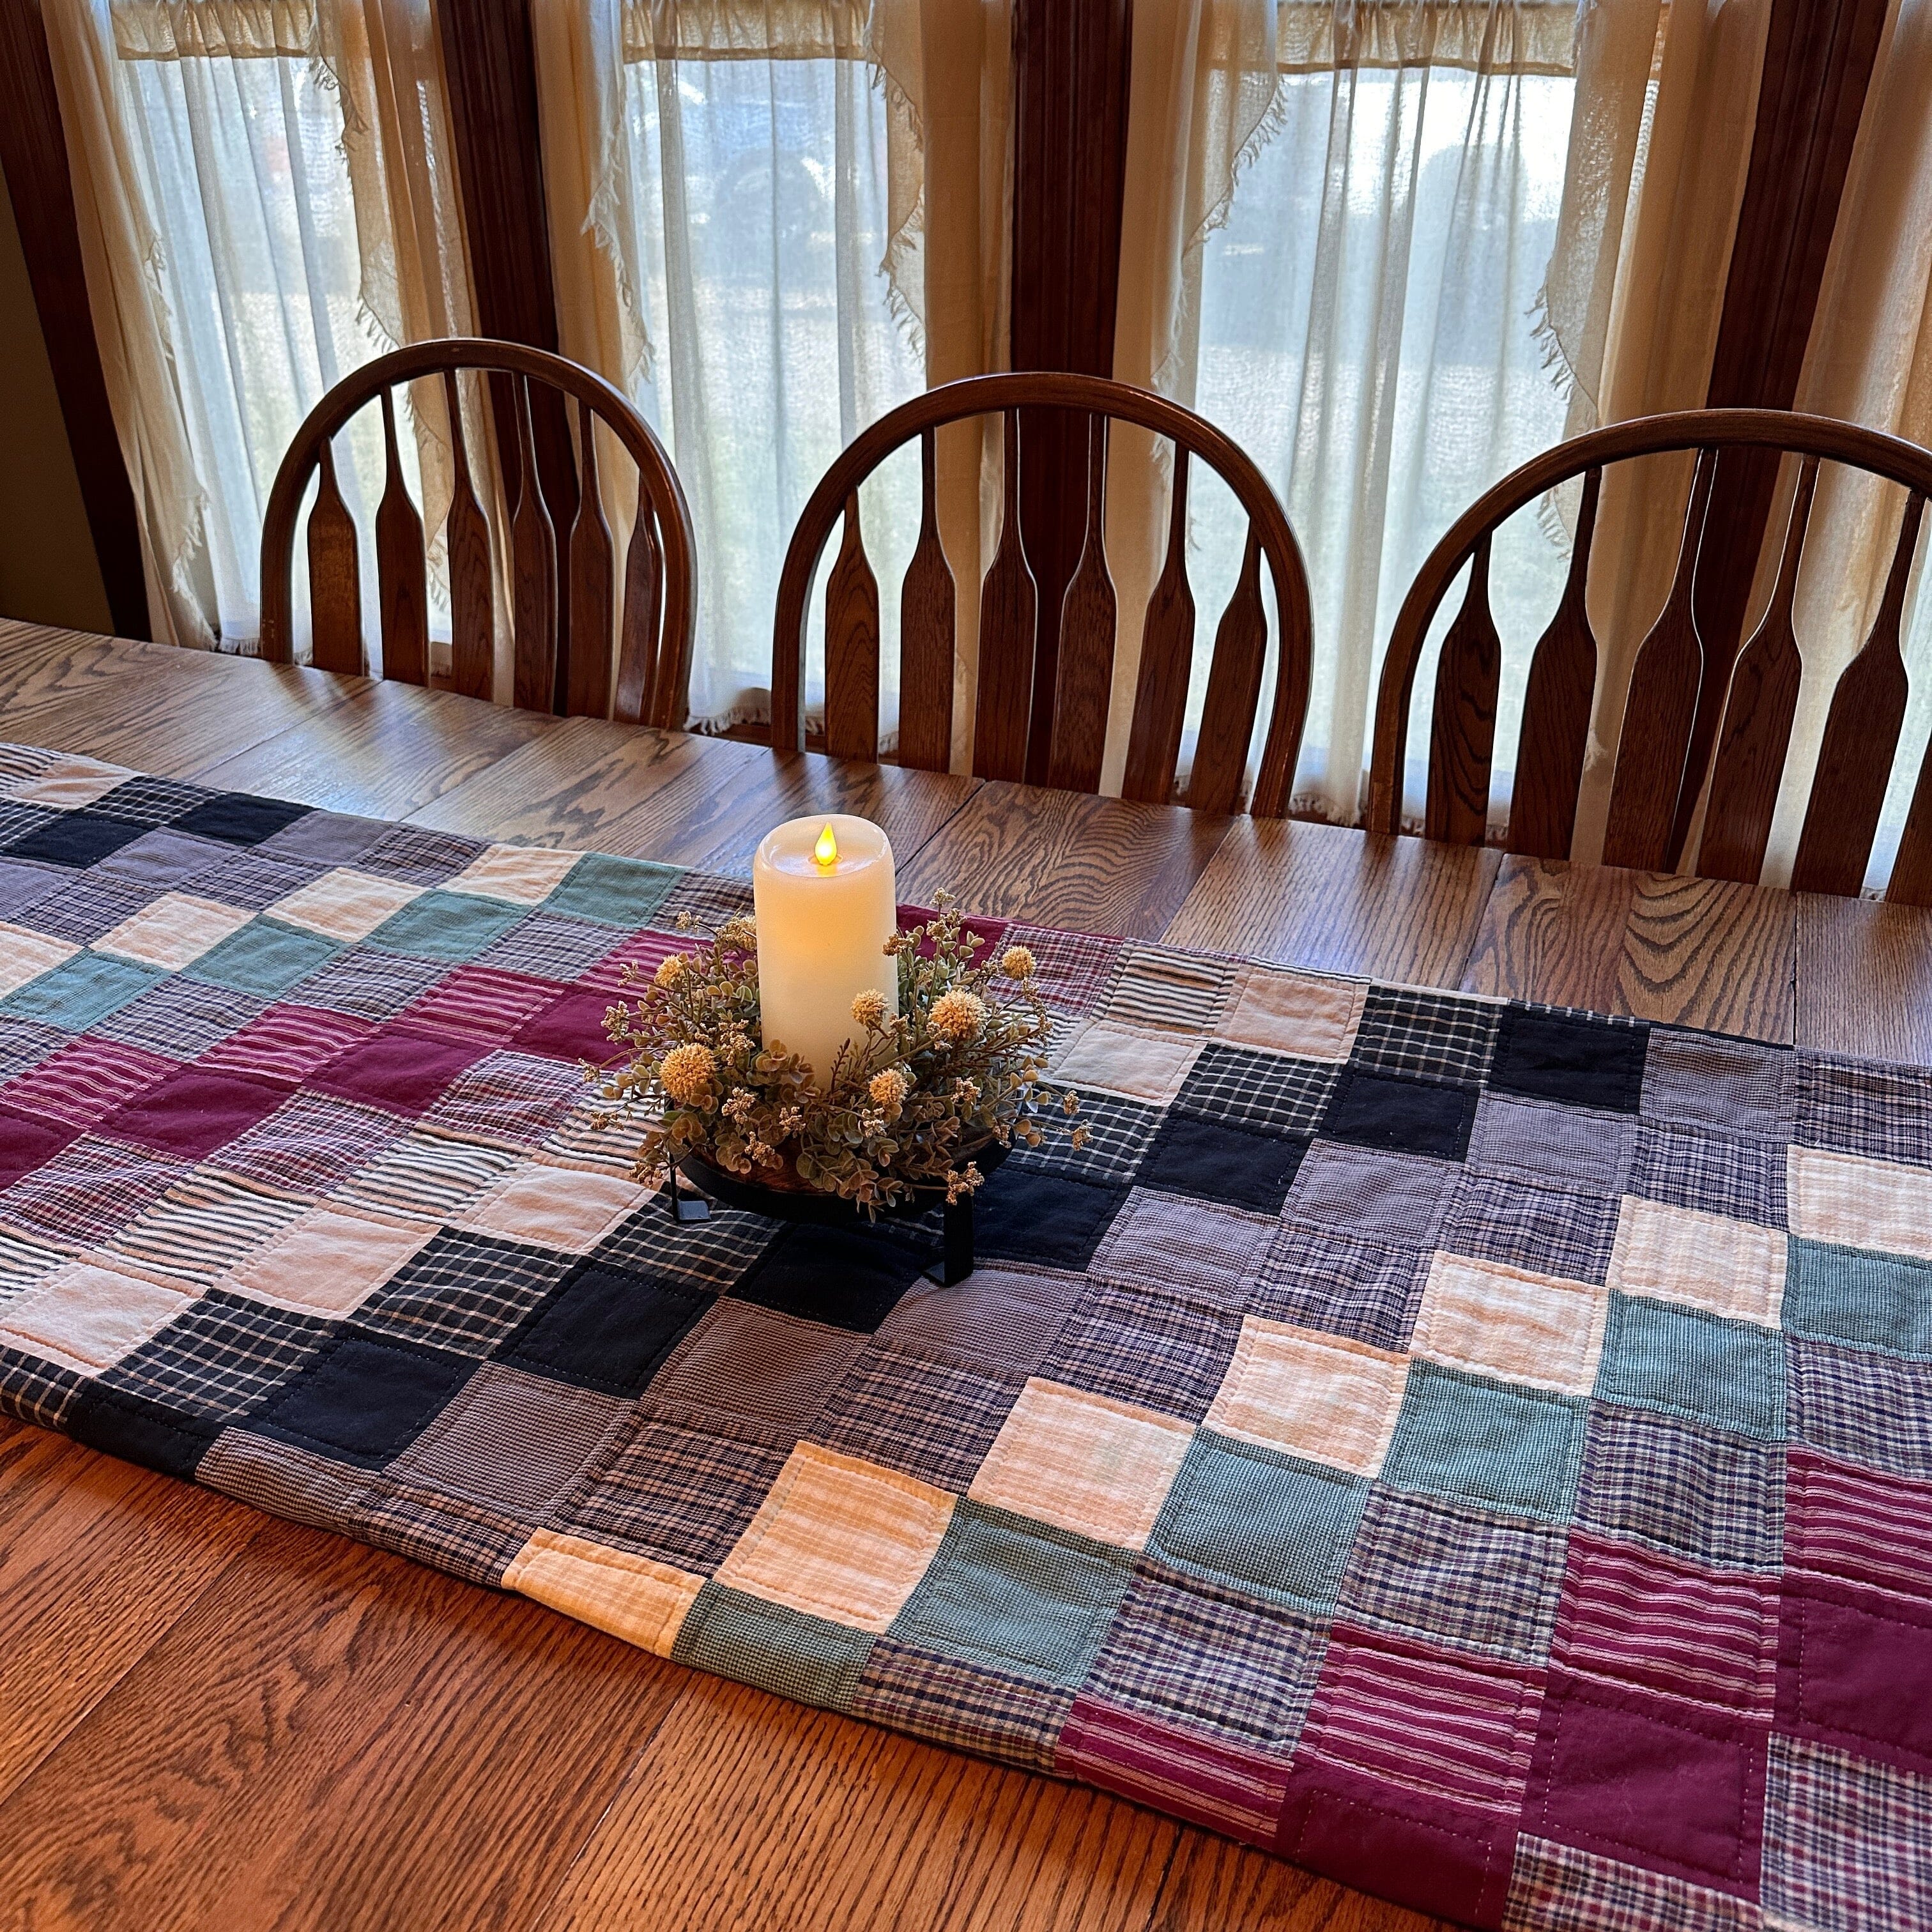 How To Create A Quilt Display  Quilt display, Quilt display racks, Quilting  room